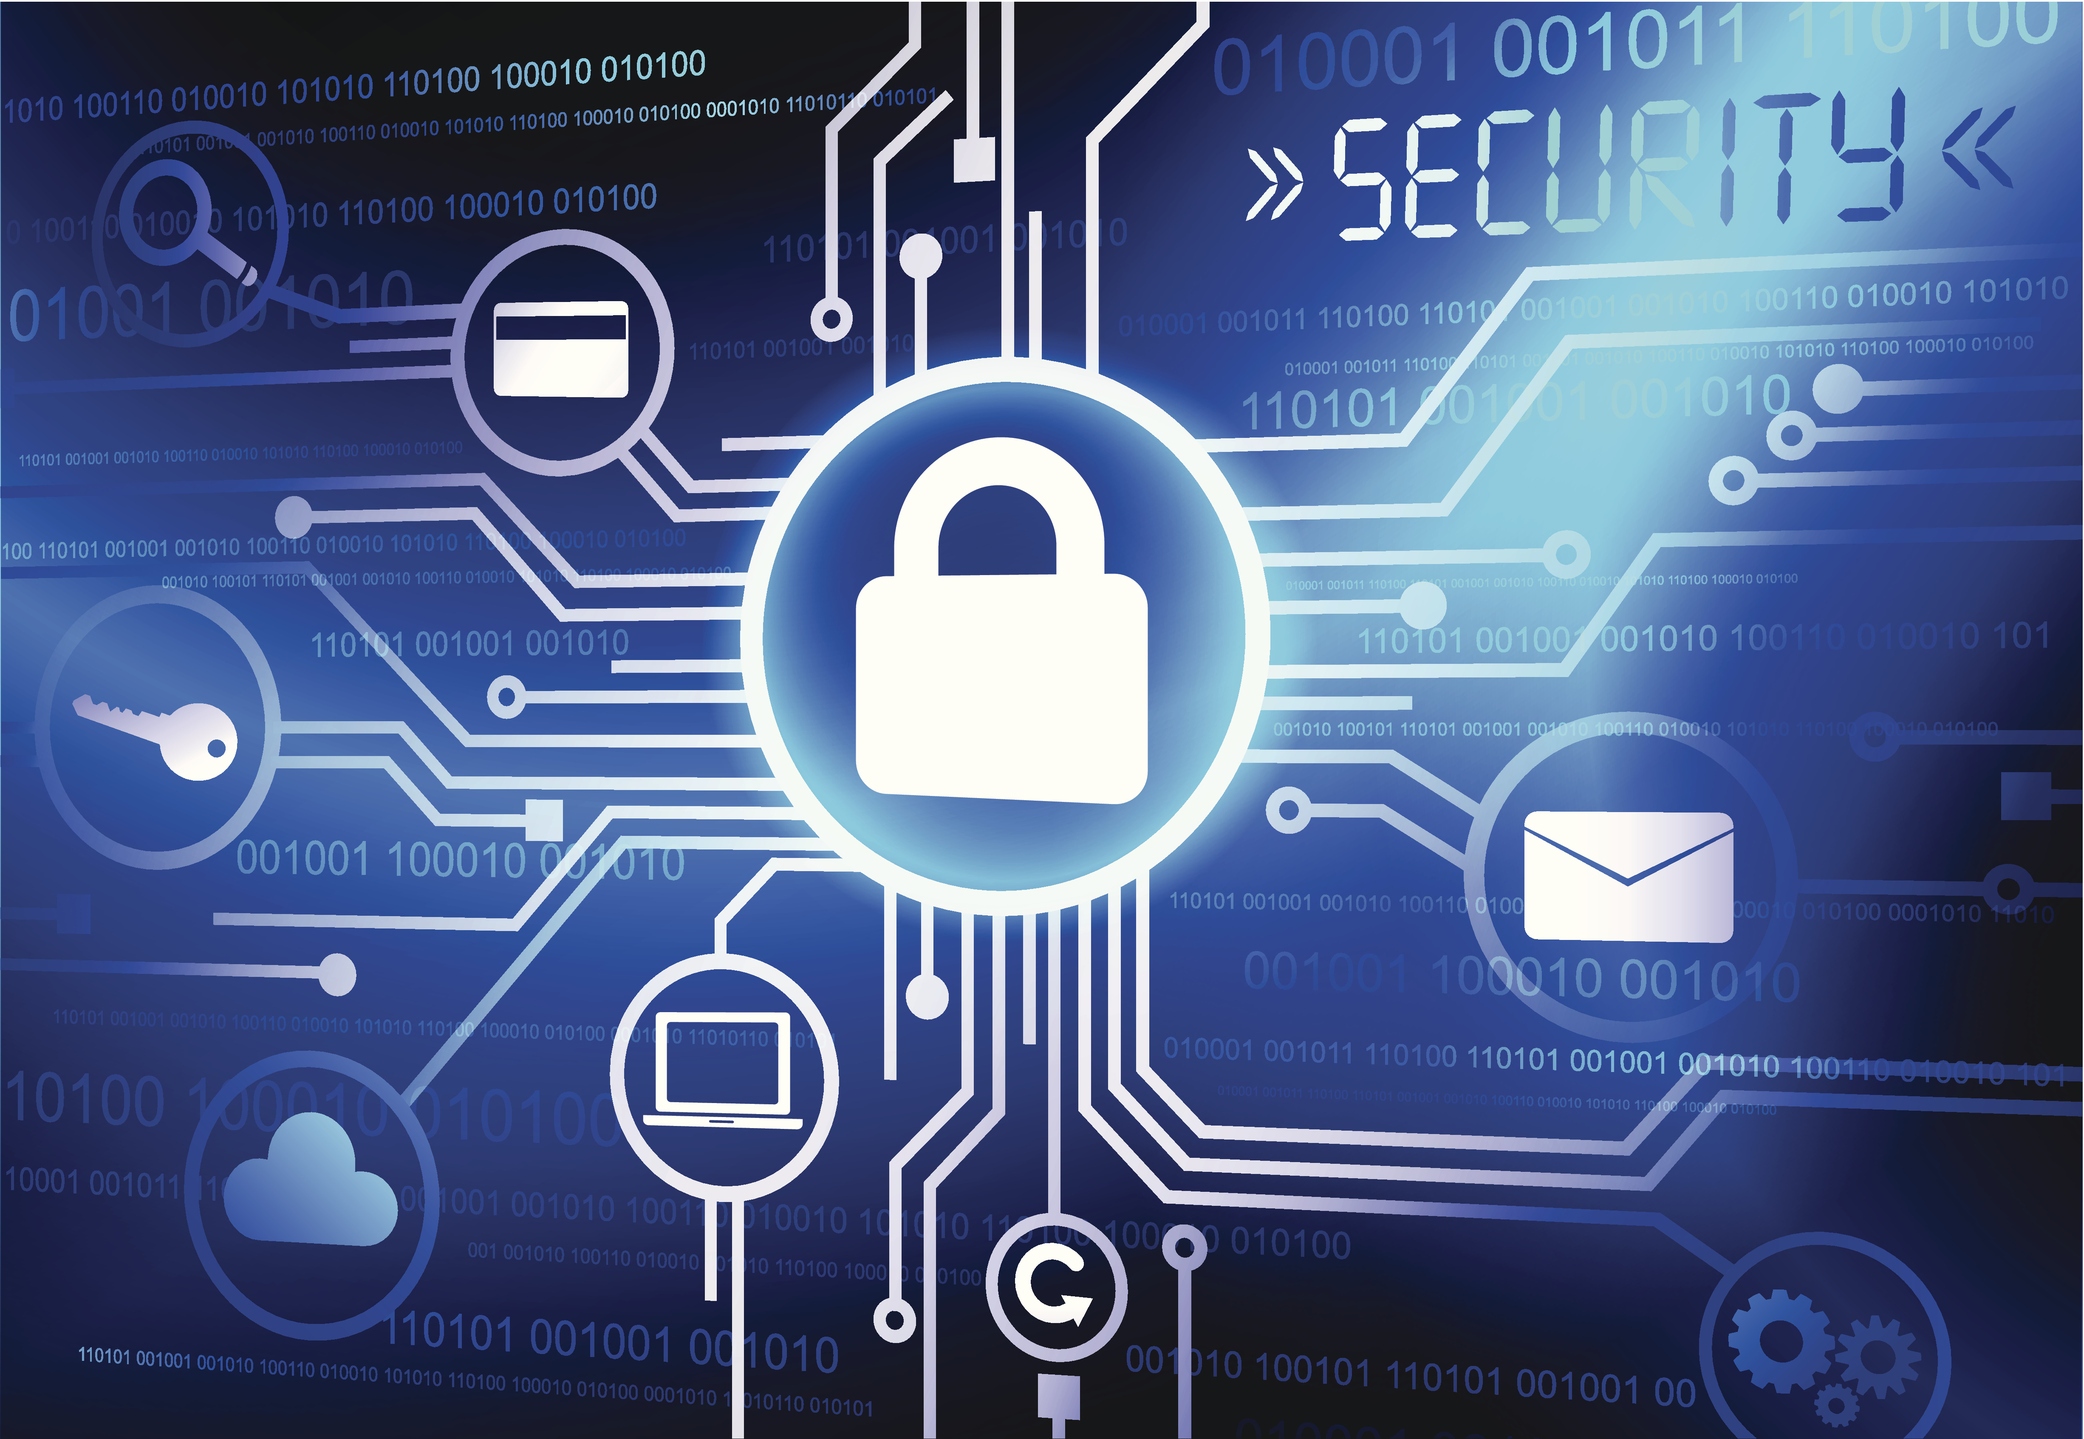 Thales agrees to buy Gemalto in digital security deal worth ~$5.43BN